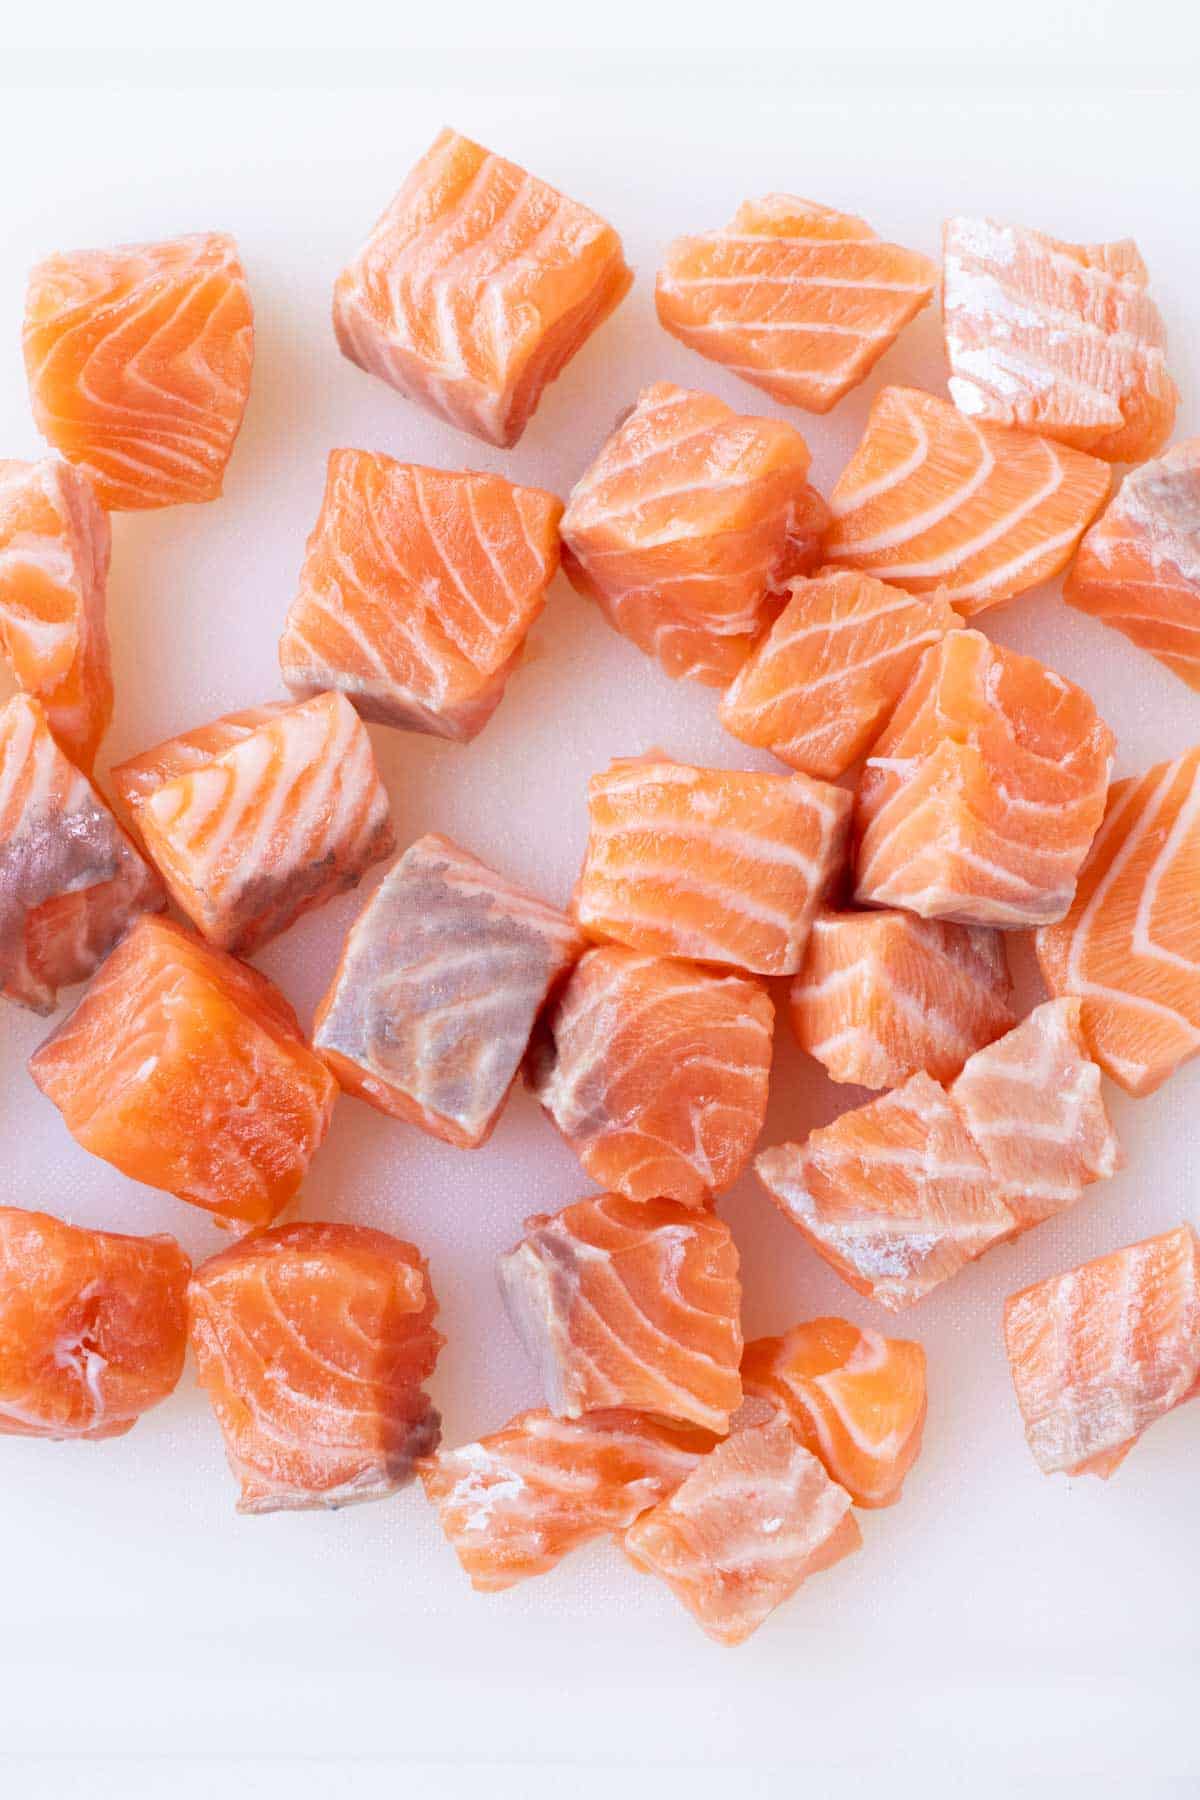 Salmon is cut into bite-sized pieces.